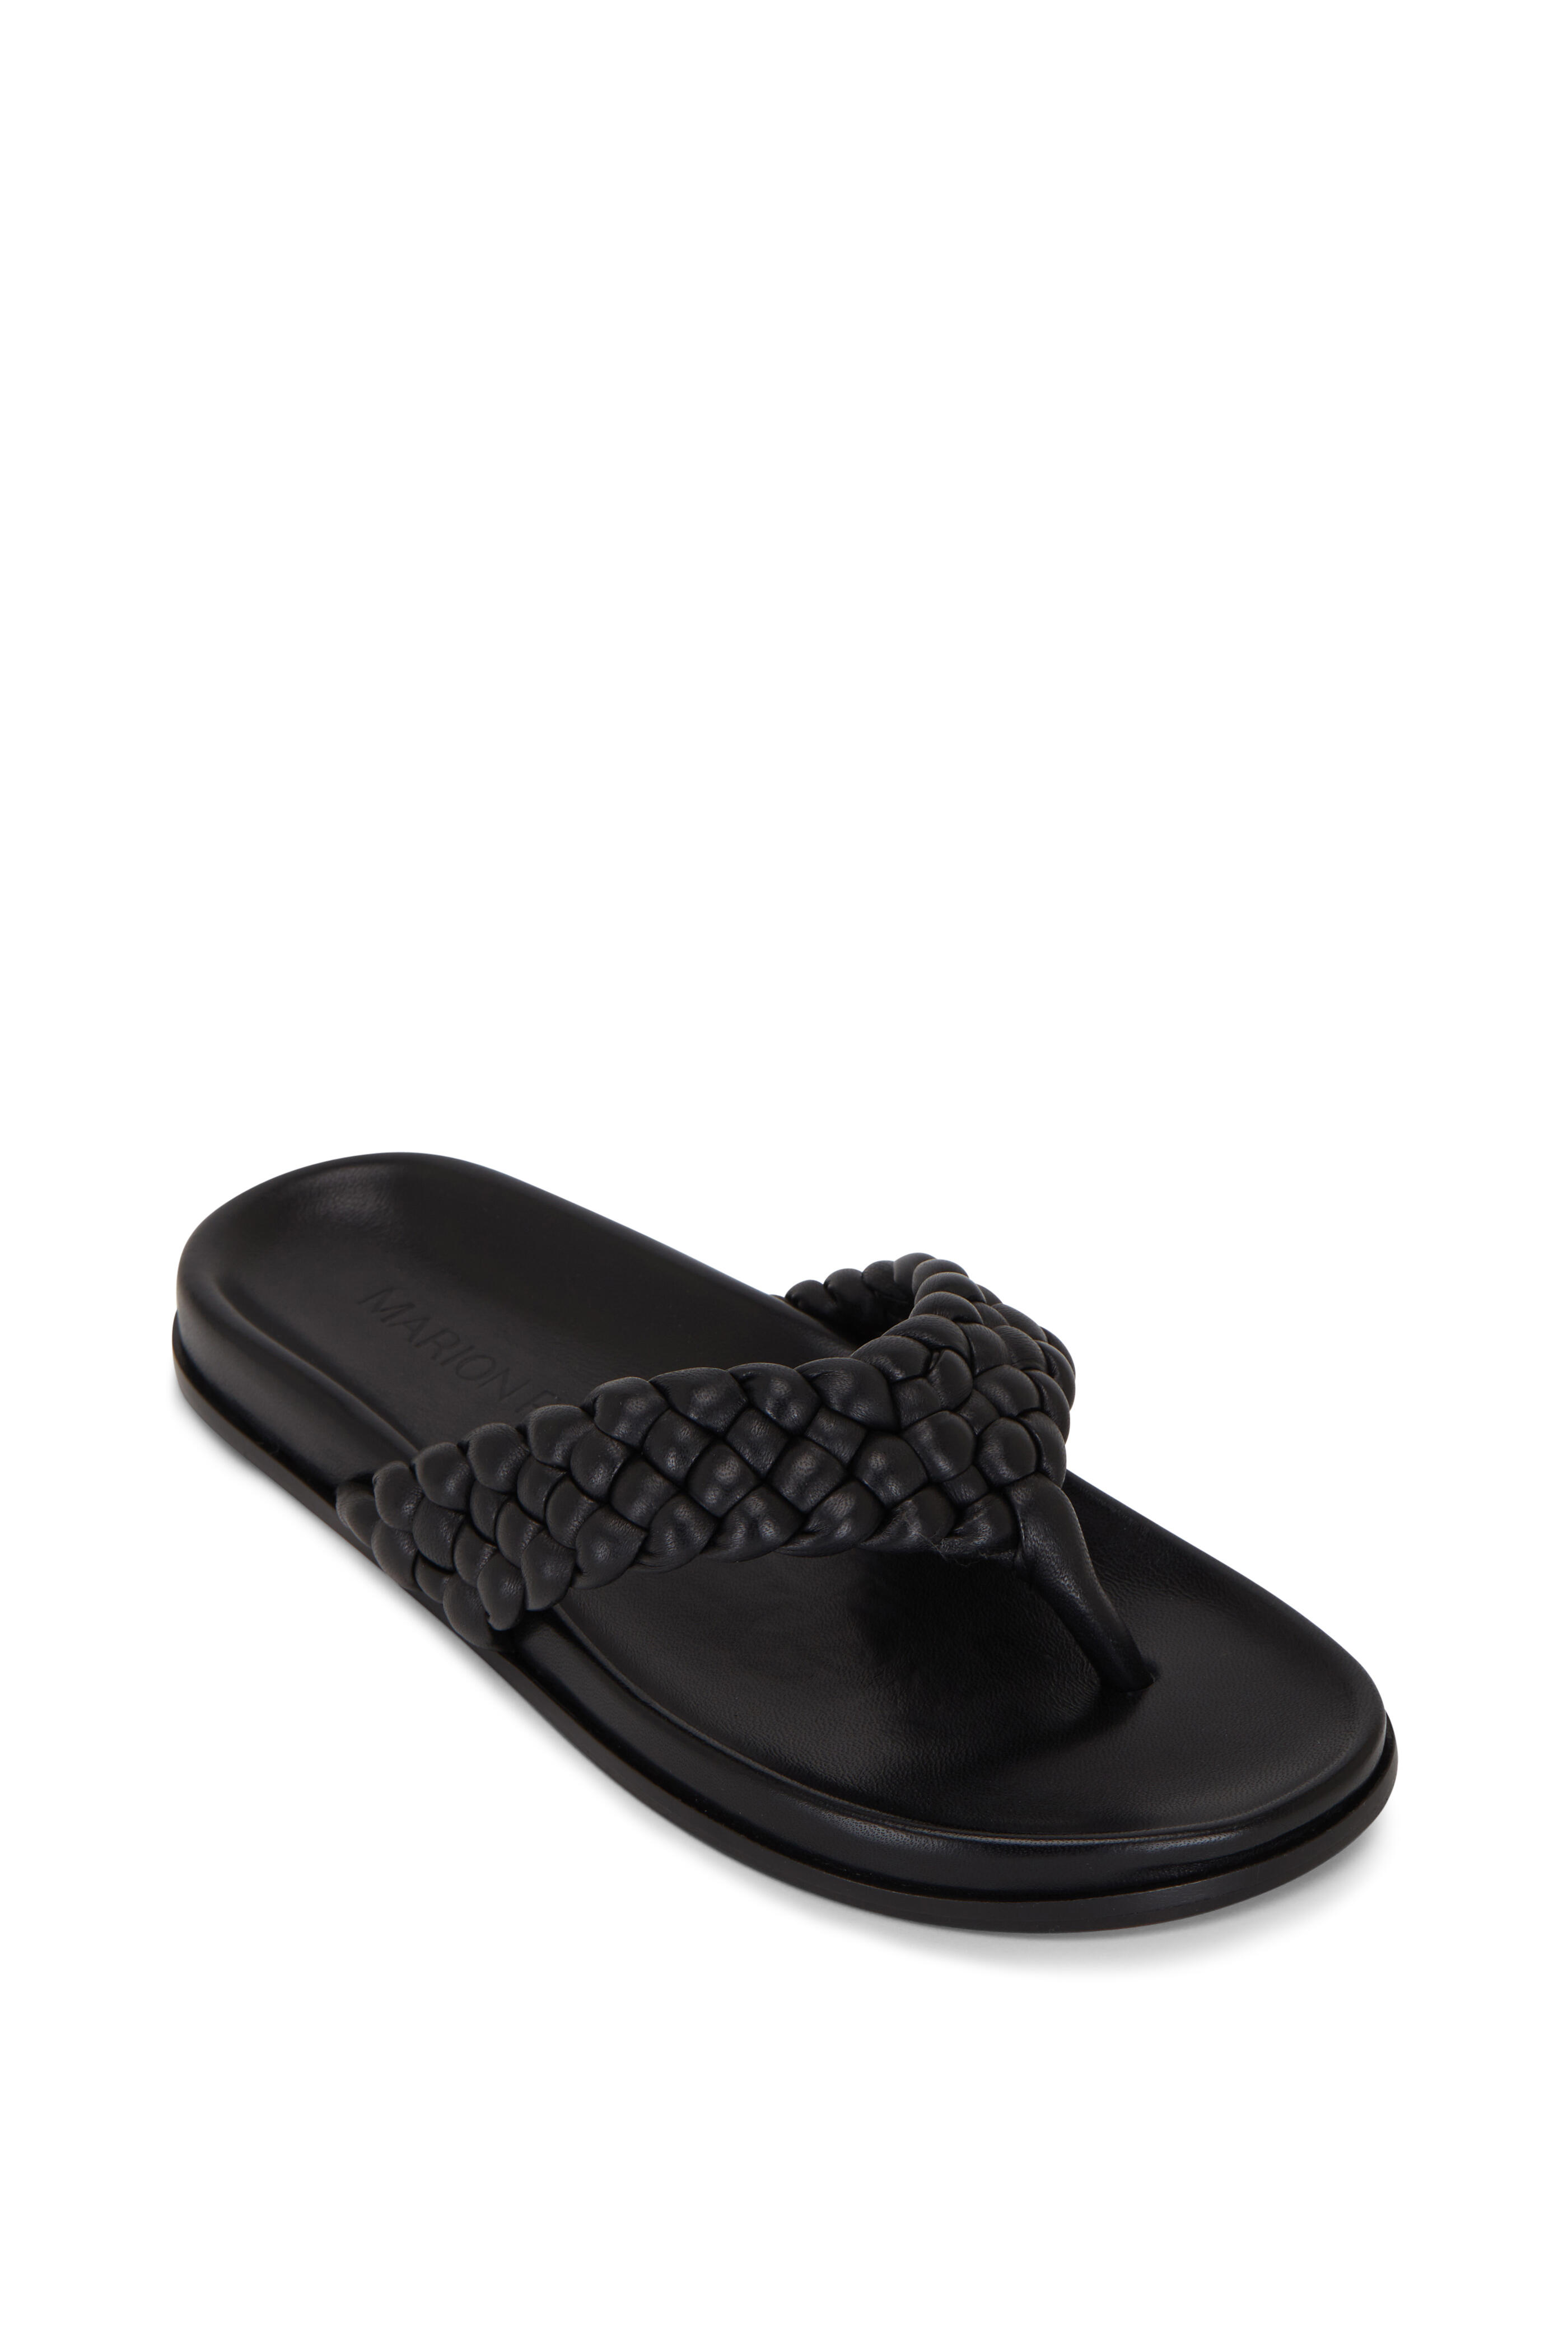 Marion leather thong sandals